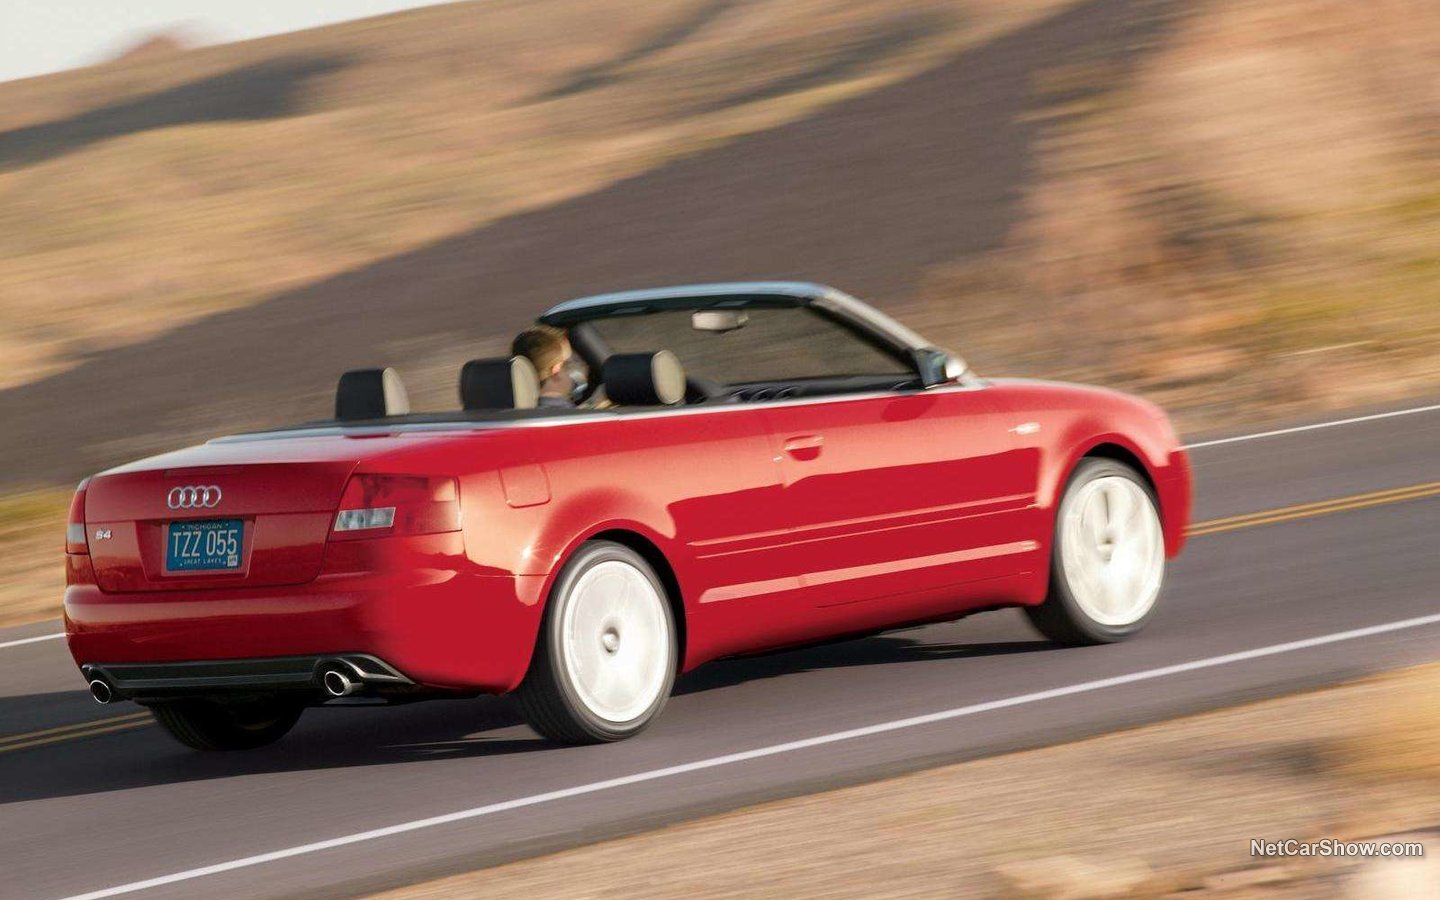 Audi A4 S4 Cabriolet 2005 6a950db8